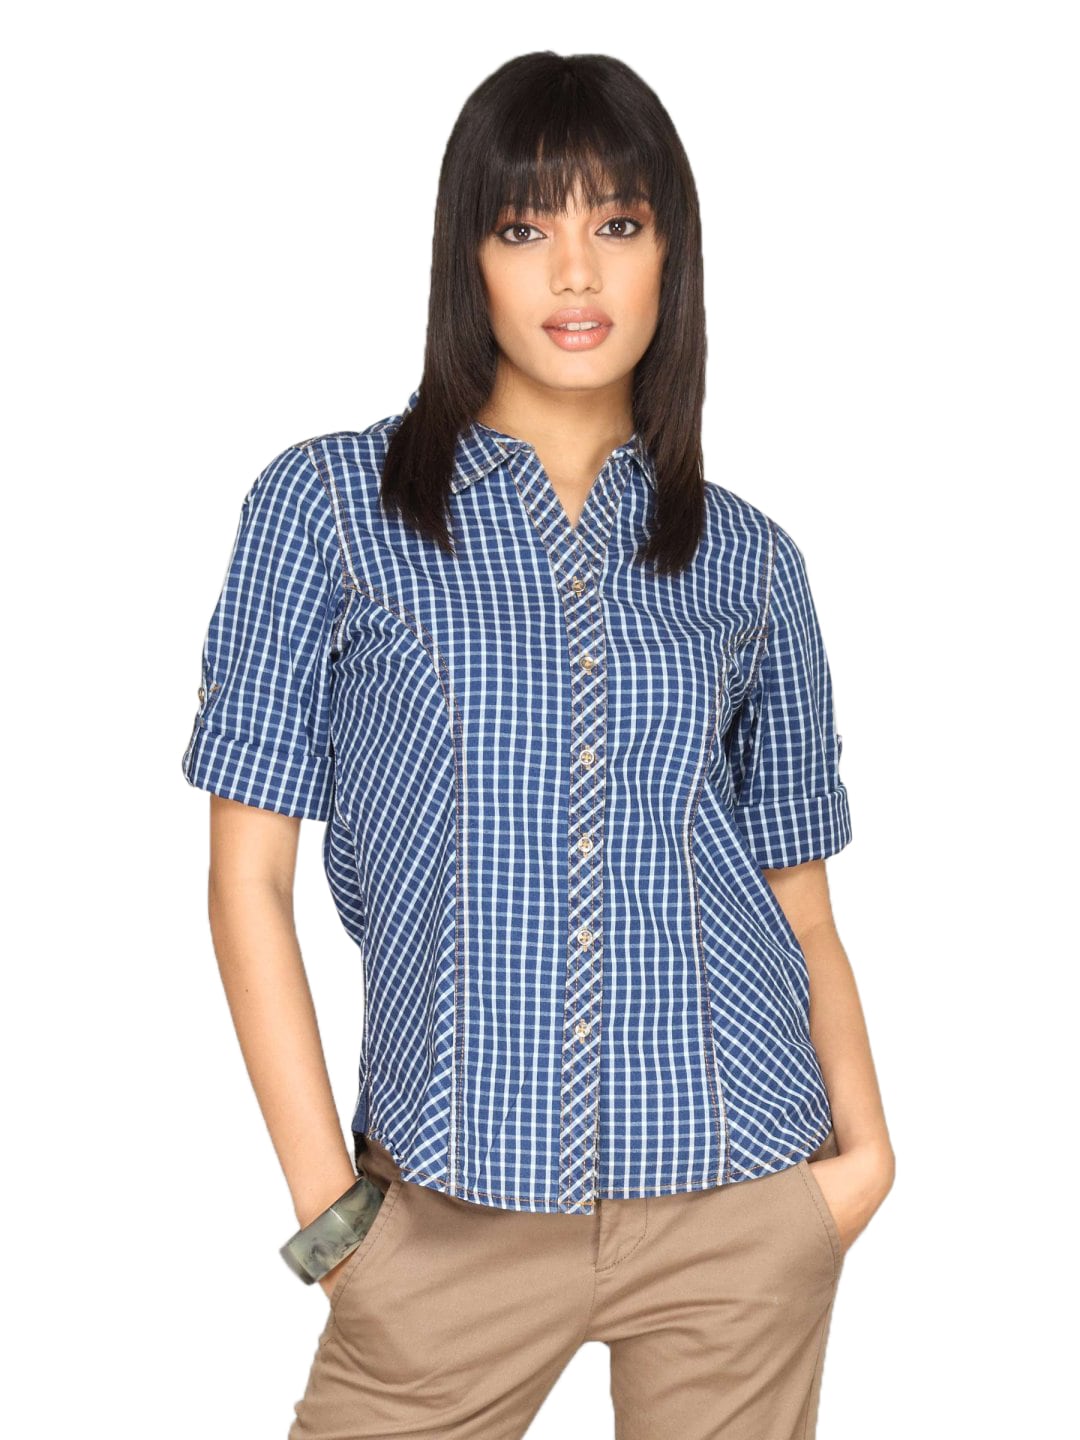 Scullers For Her Women Rivited Indigo Check Blue Shirt